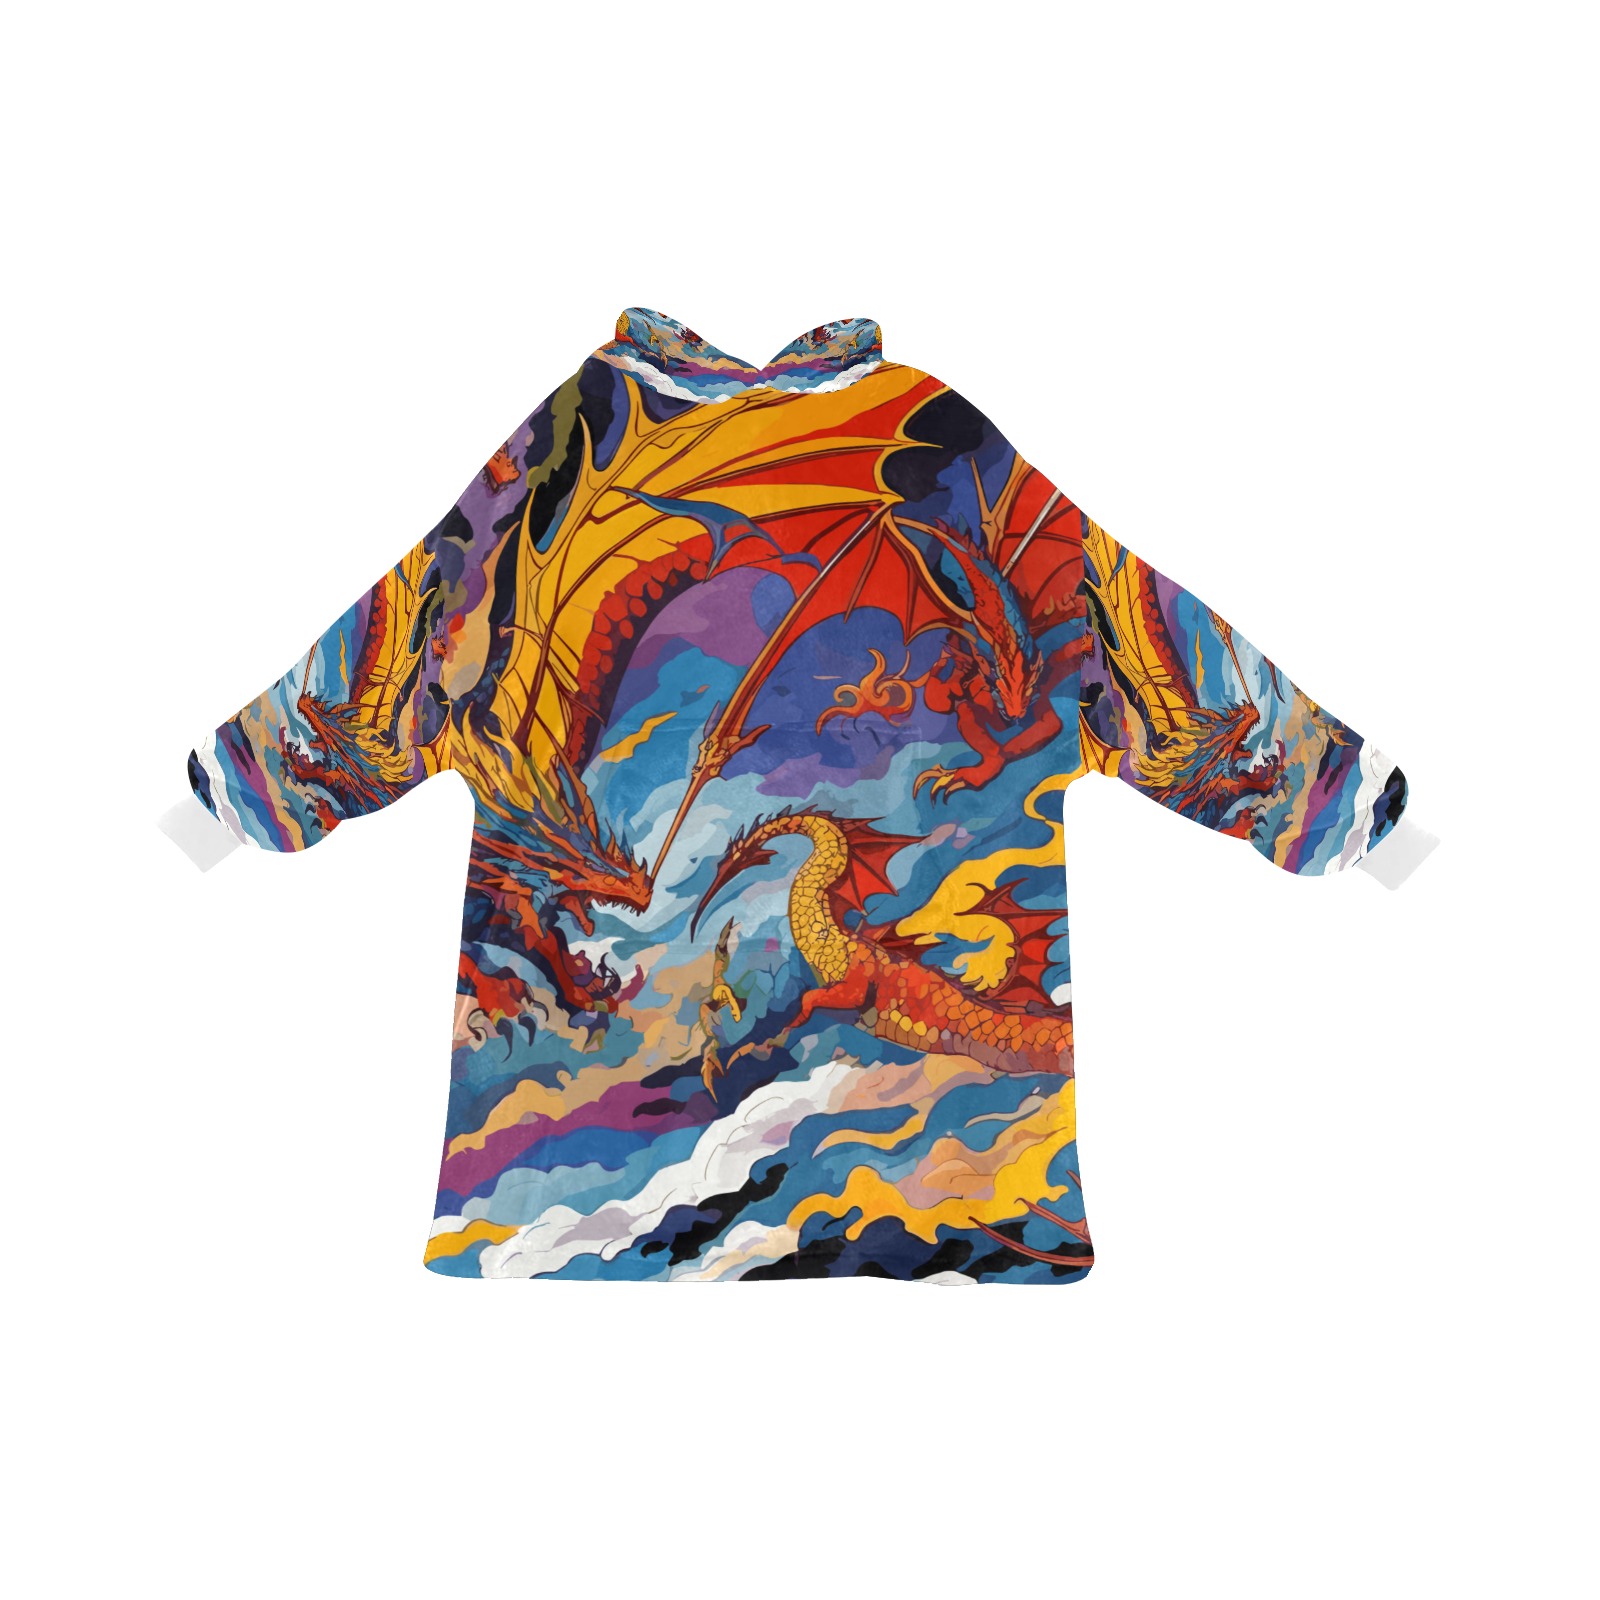 Horrible fire dragons, fire and clouds of smoke. Blanket Hoodie for Men